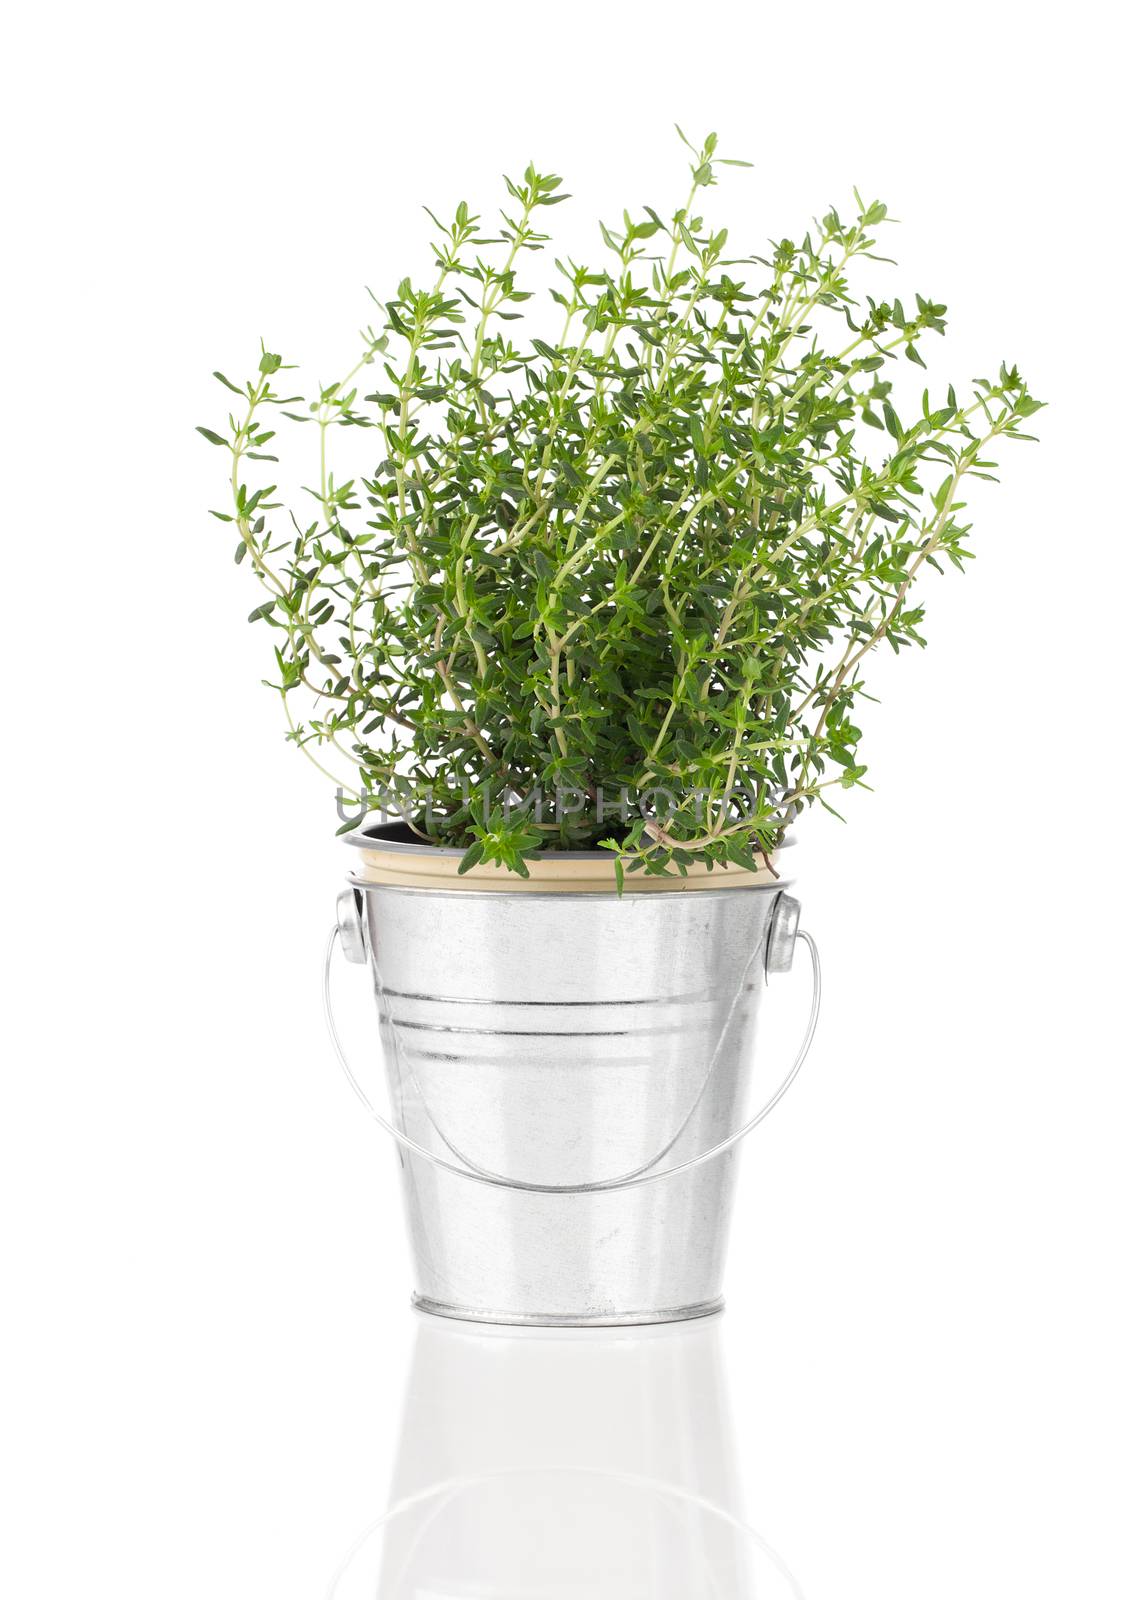 thyme herb plant growing in a distressed pewter pot, isolated ov by motorolka